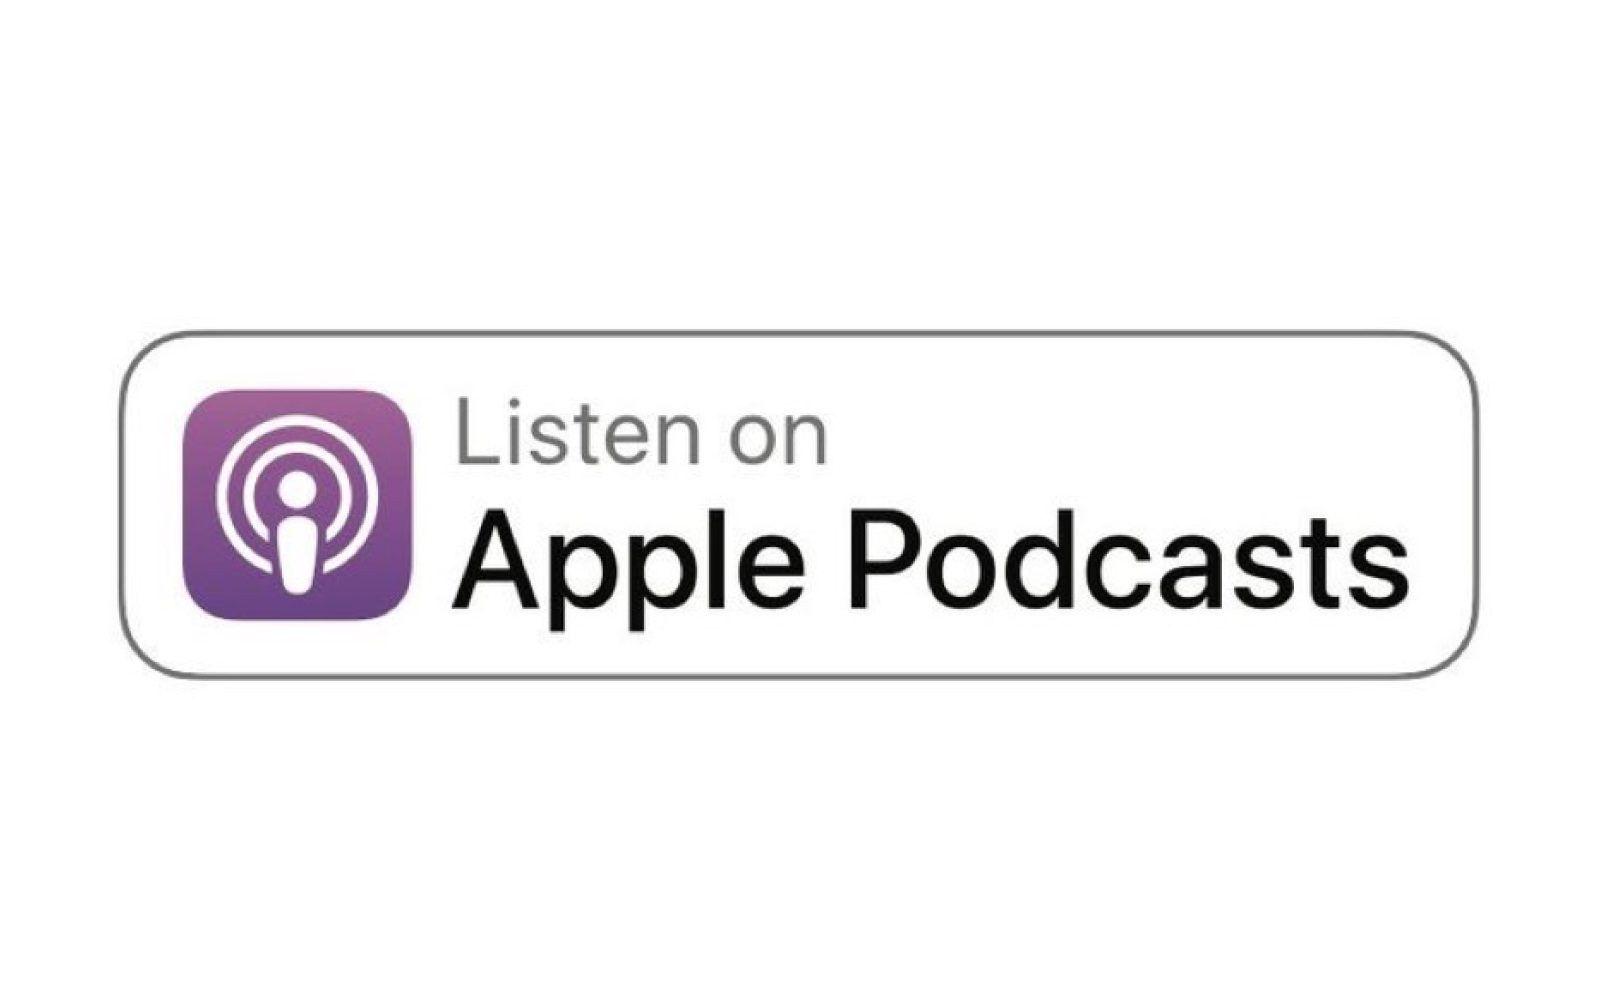 iTunes Store Logo - Apple rebrands iTunes Podcasts directory as Apple Podcasts, new ...